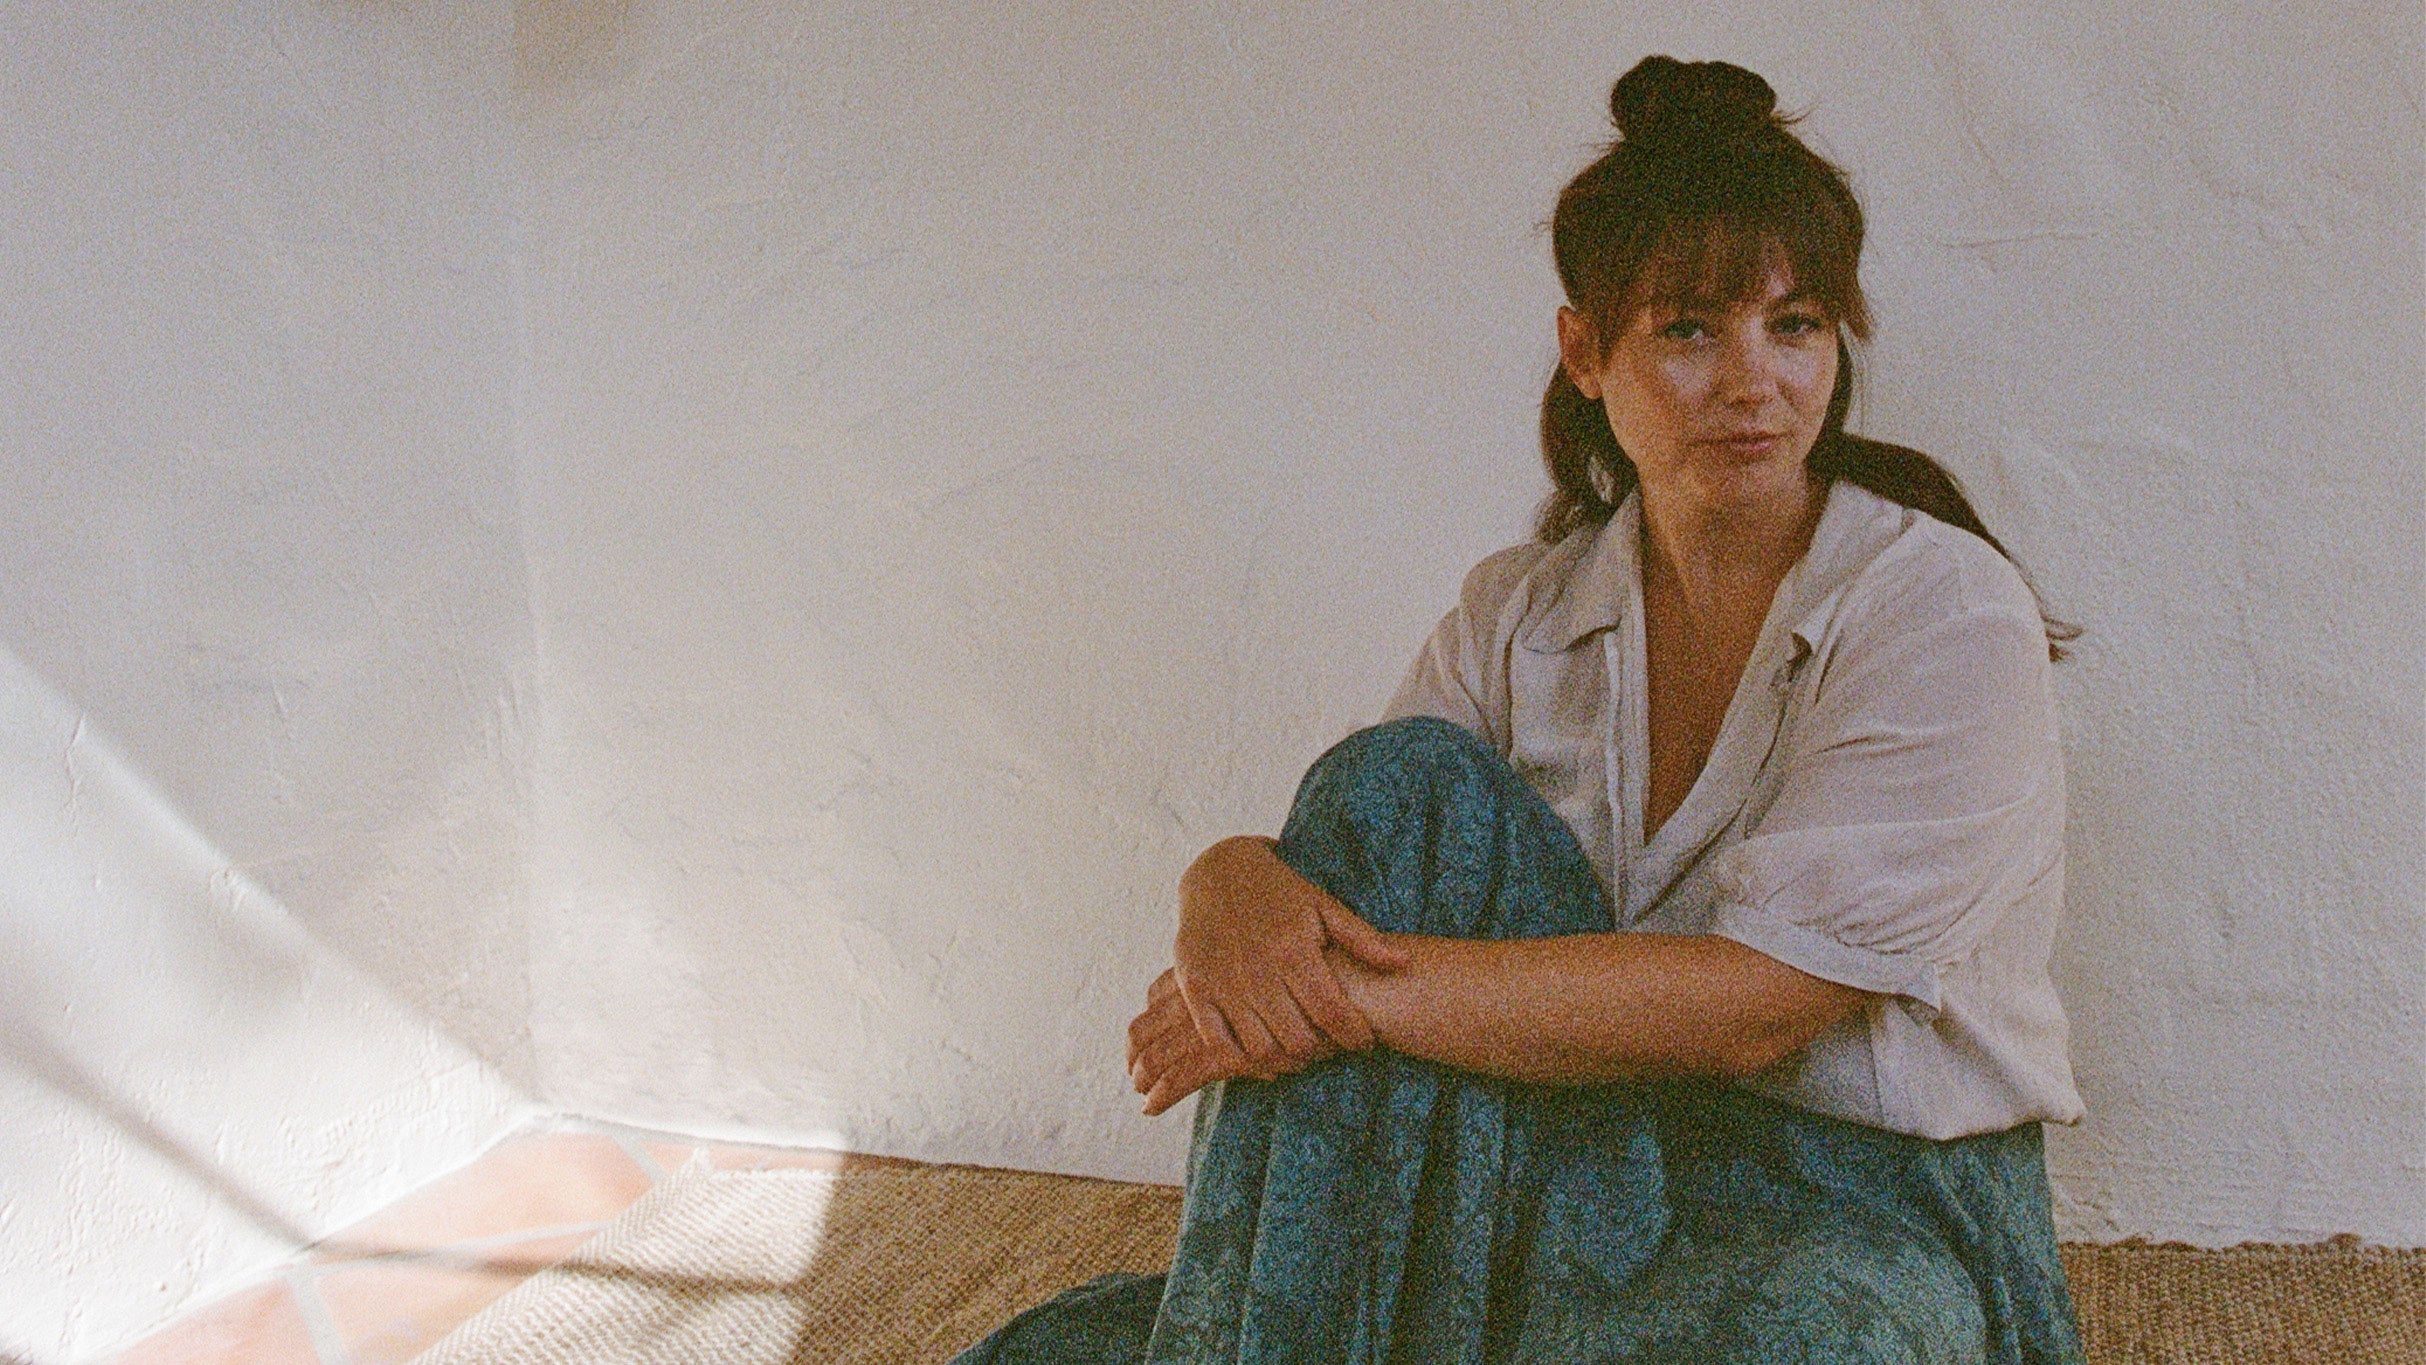 Angel Olsen (Solo): Songs From The Archive in Portland promo photo for Artist presale offer code